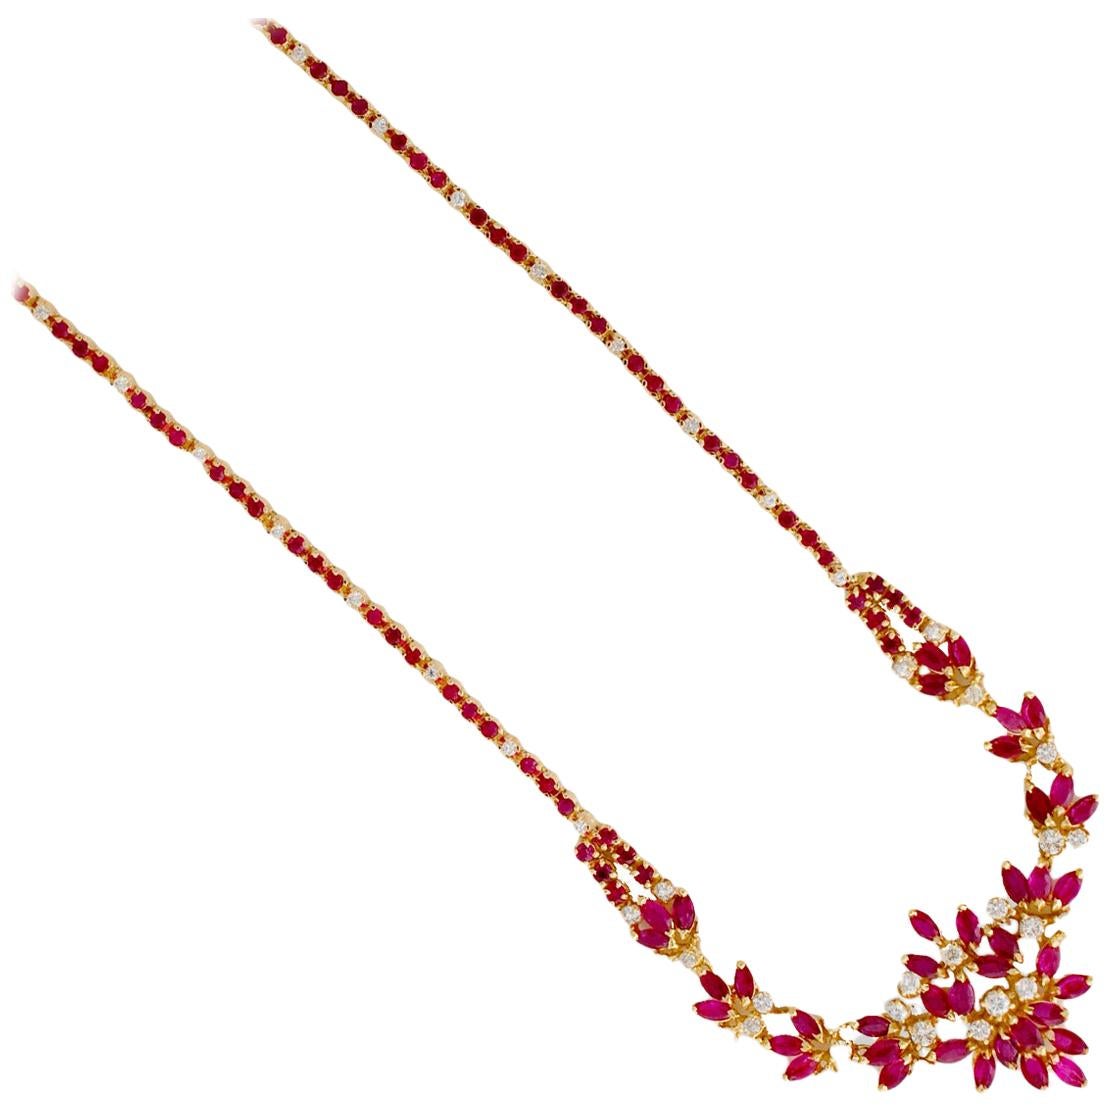 Marquise Ruby and Diamond Necklace 7.75 Carat, Quality Heavy Gold 37.8 Grams